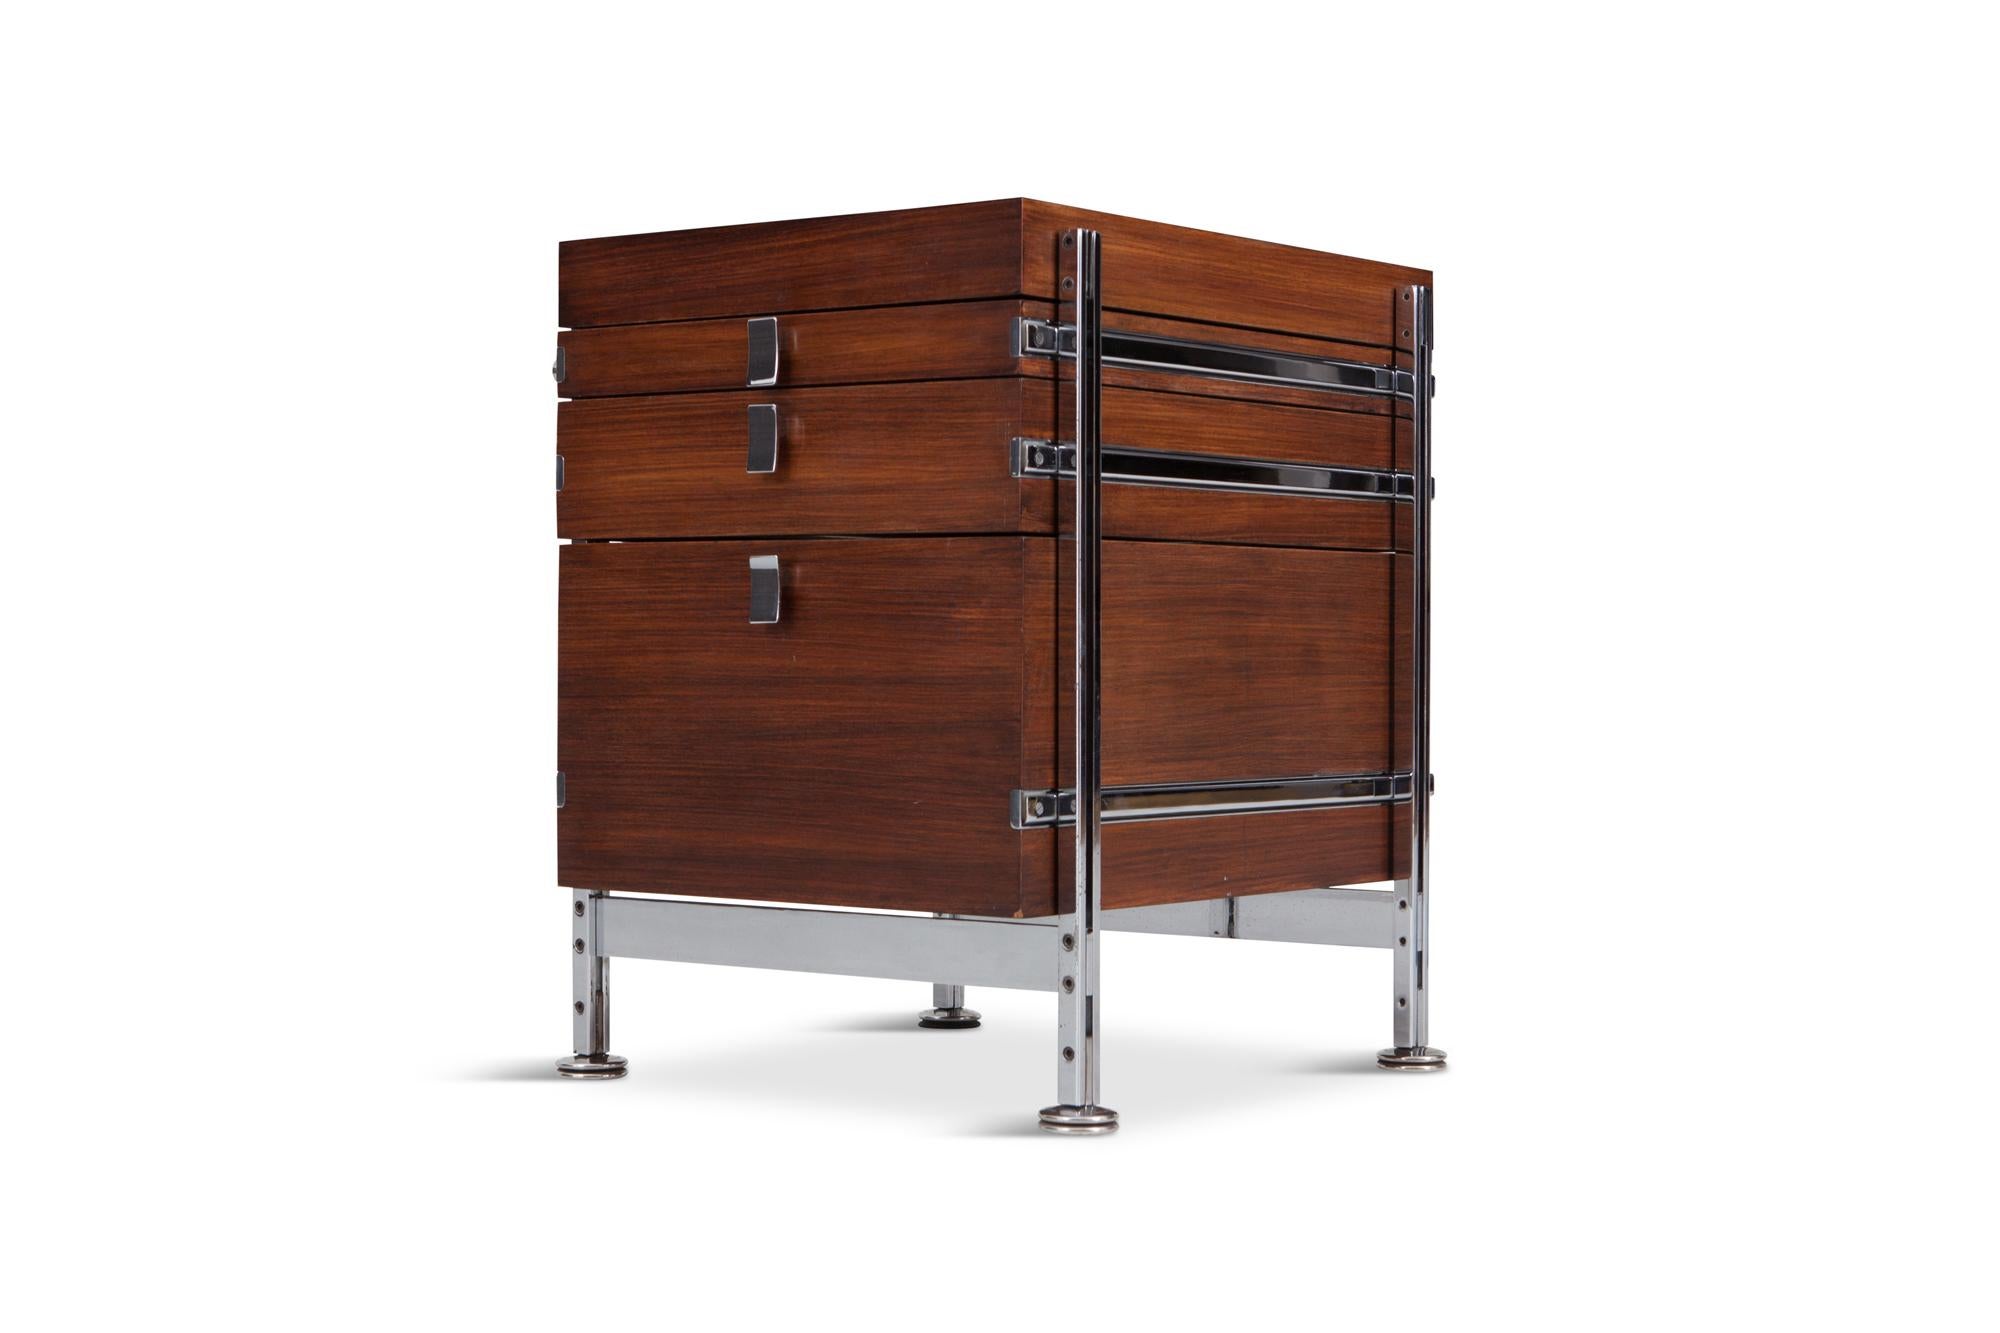 Mobilier Universel,  Jules Wabbes, Belgium, 1960s, 

Jules Wabbes was a famed and accomplished Belgian furniture designer and interior architect. 
Chest of drawers in mahogany, mounted on a stainless steel base. 
A true iconic Belgian design. 
We